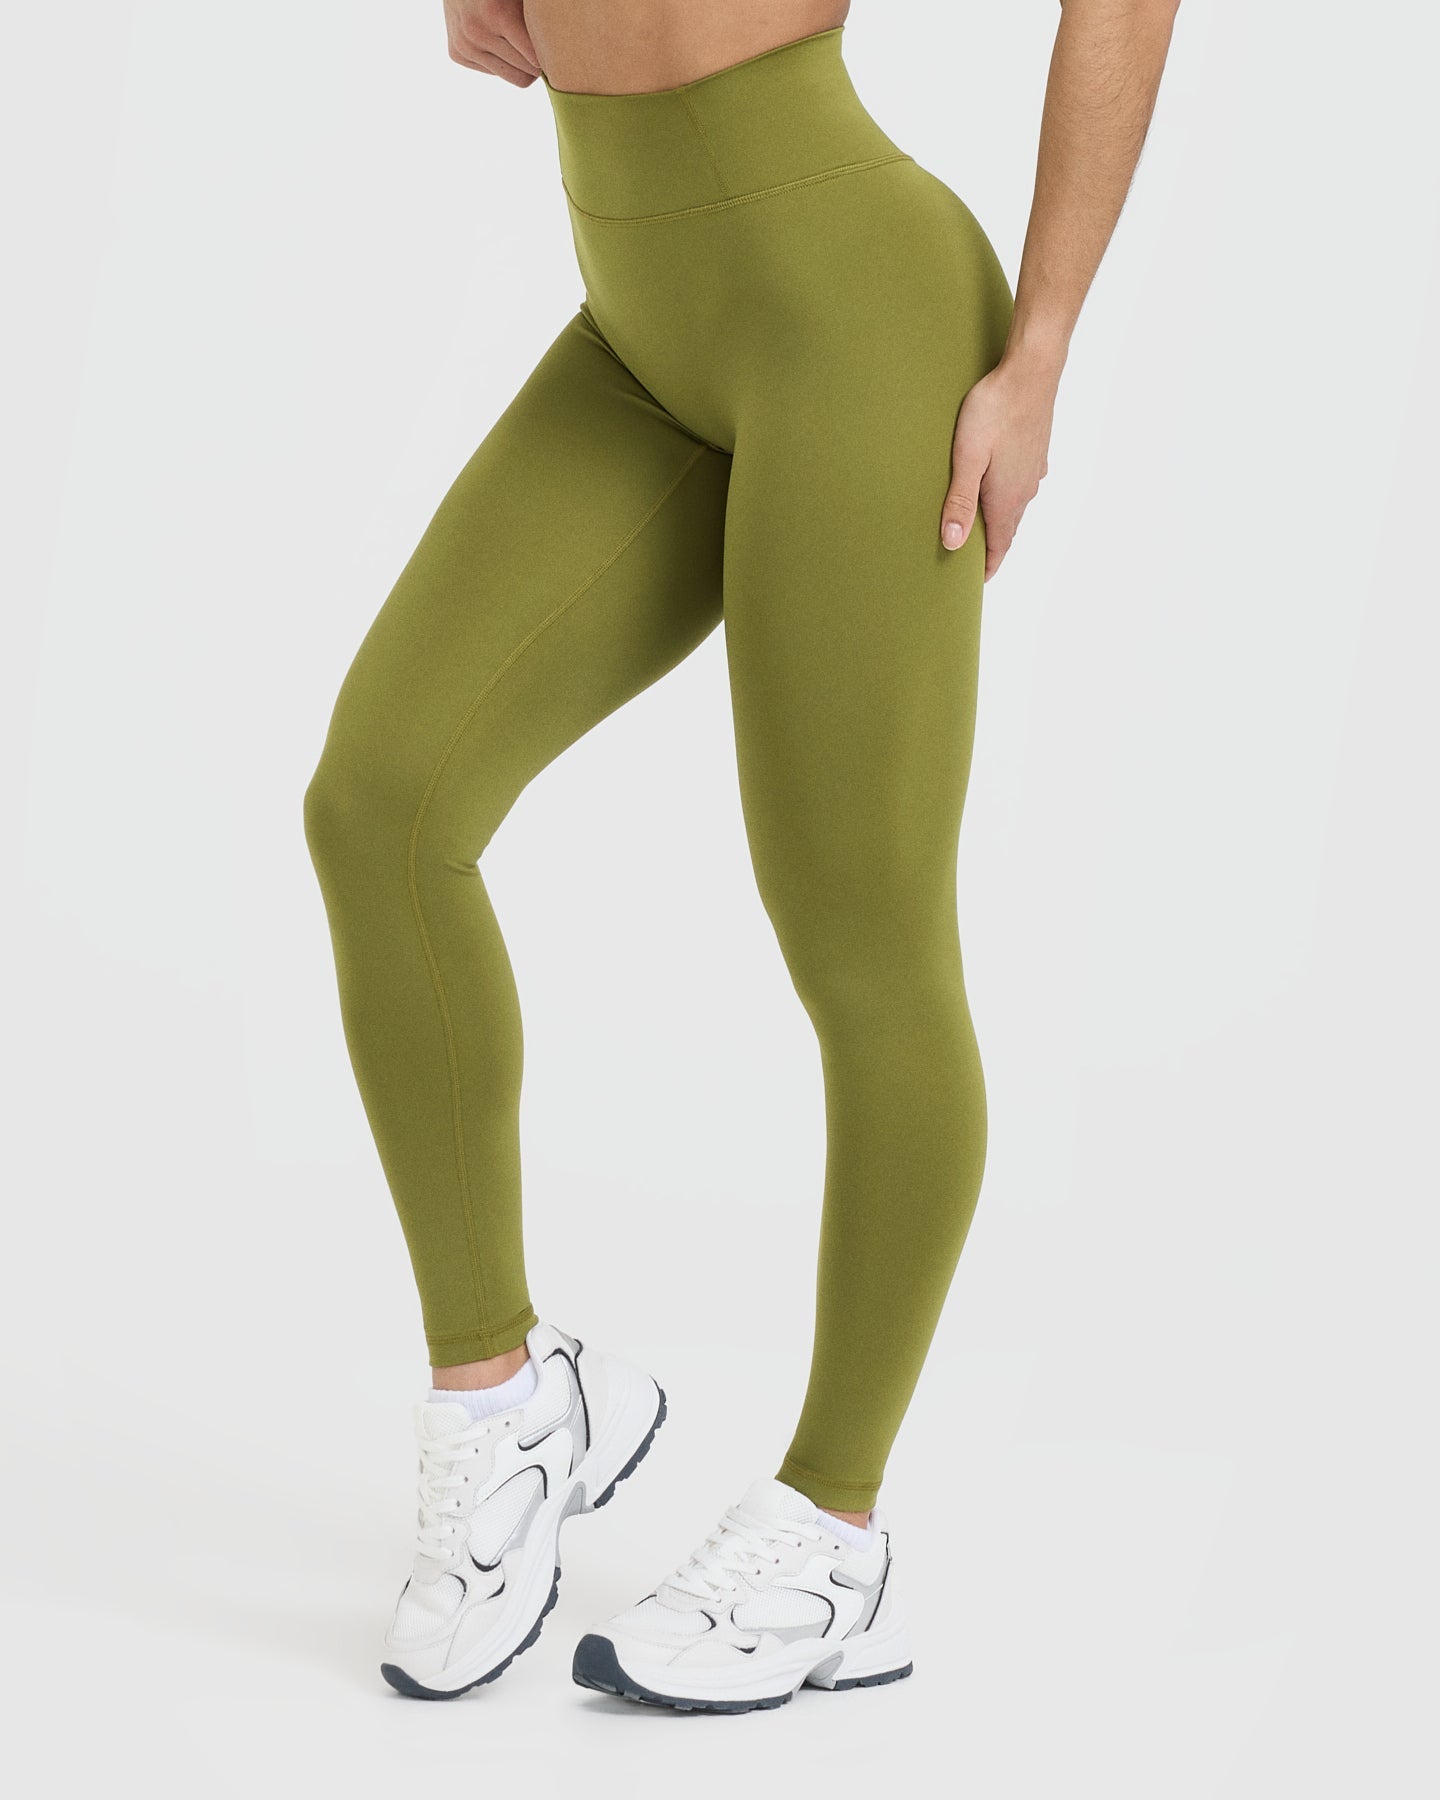 Brand - AURIQUE Women's High Waisted Running Leggings With Side  Pocket